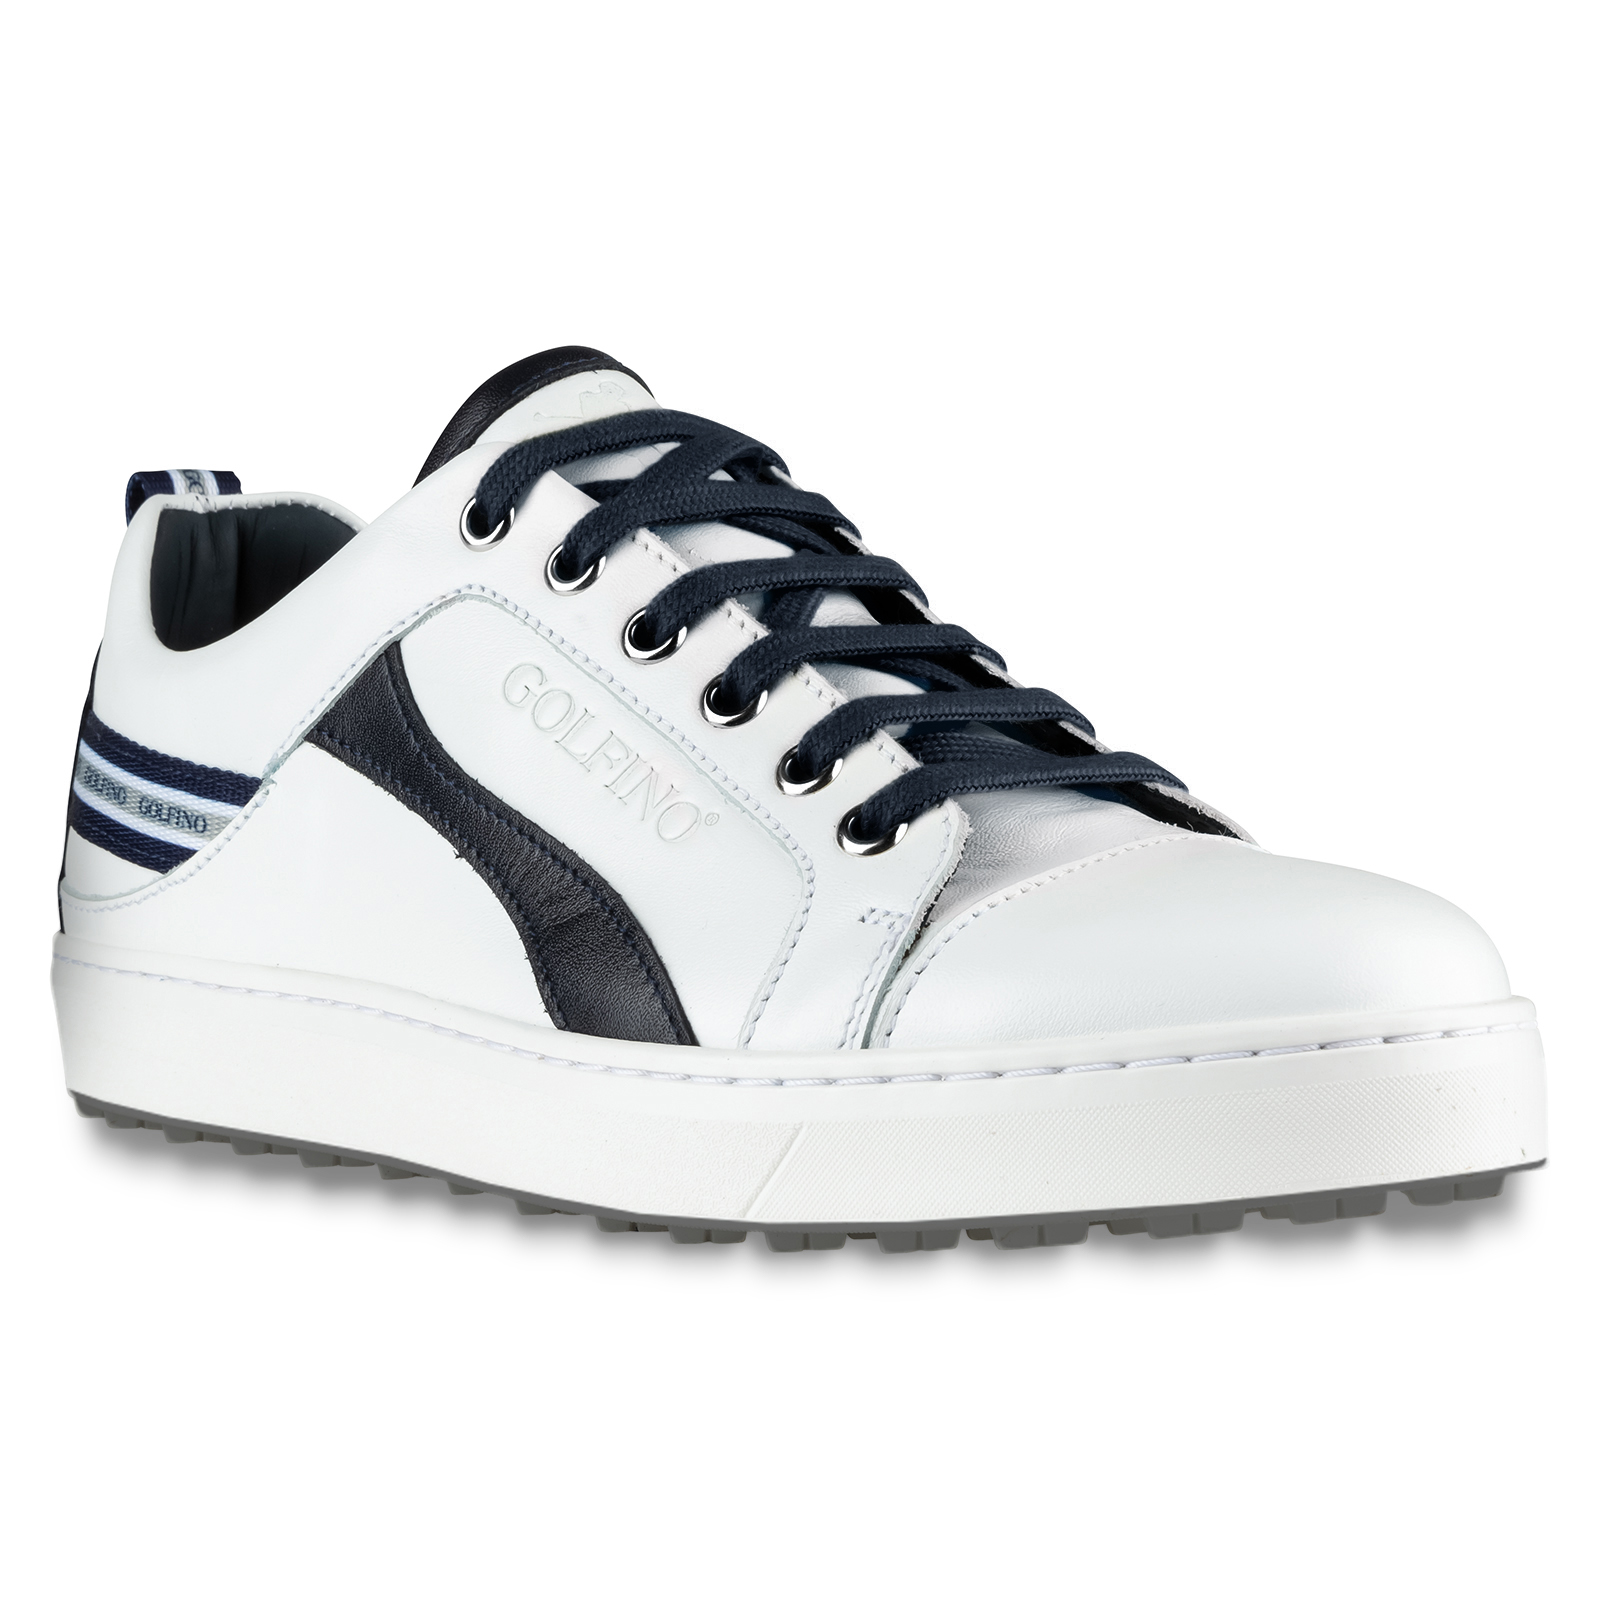 Comfortable and durable ladies' golf shoes